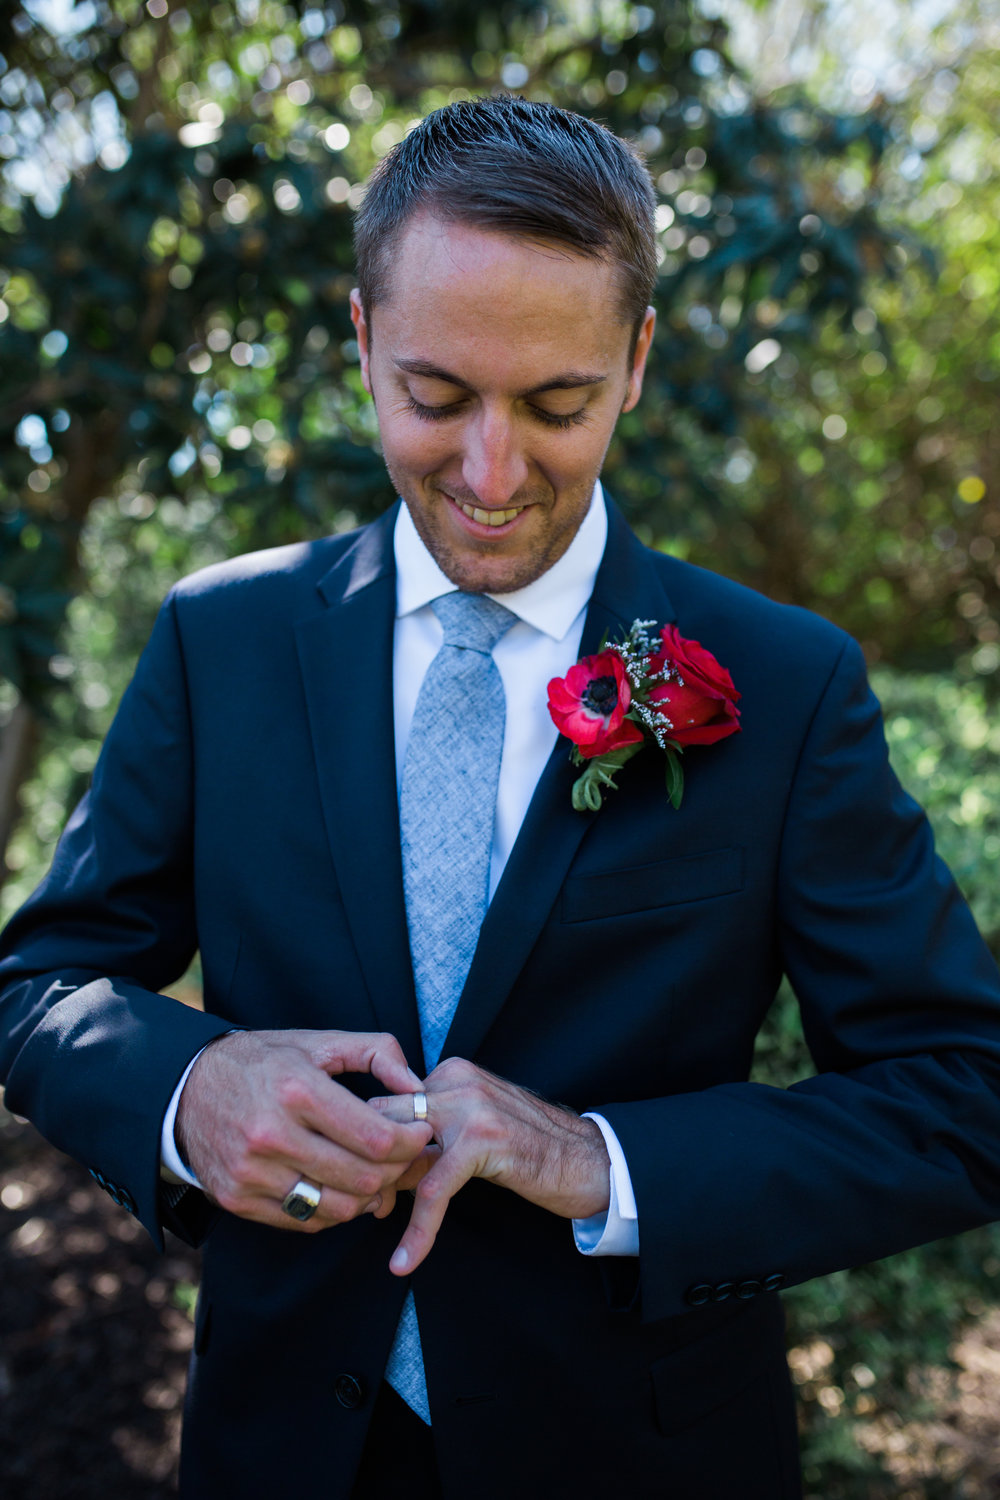 Groom playing with wedding ring before ceremony
